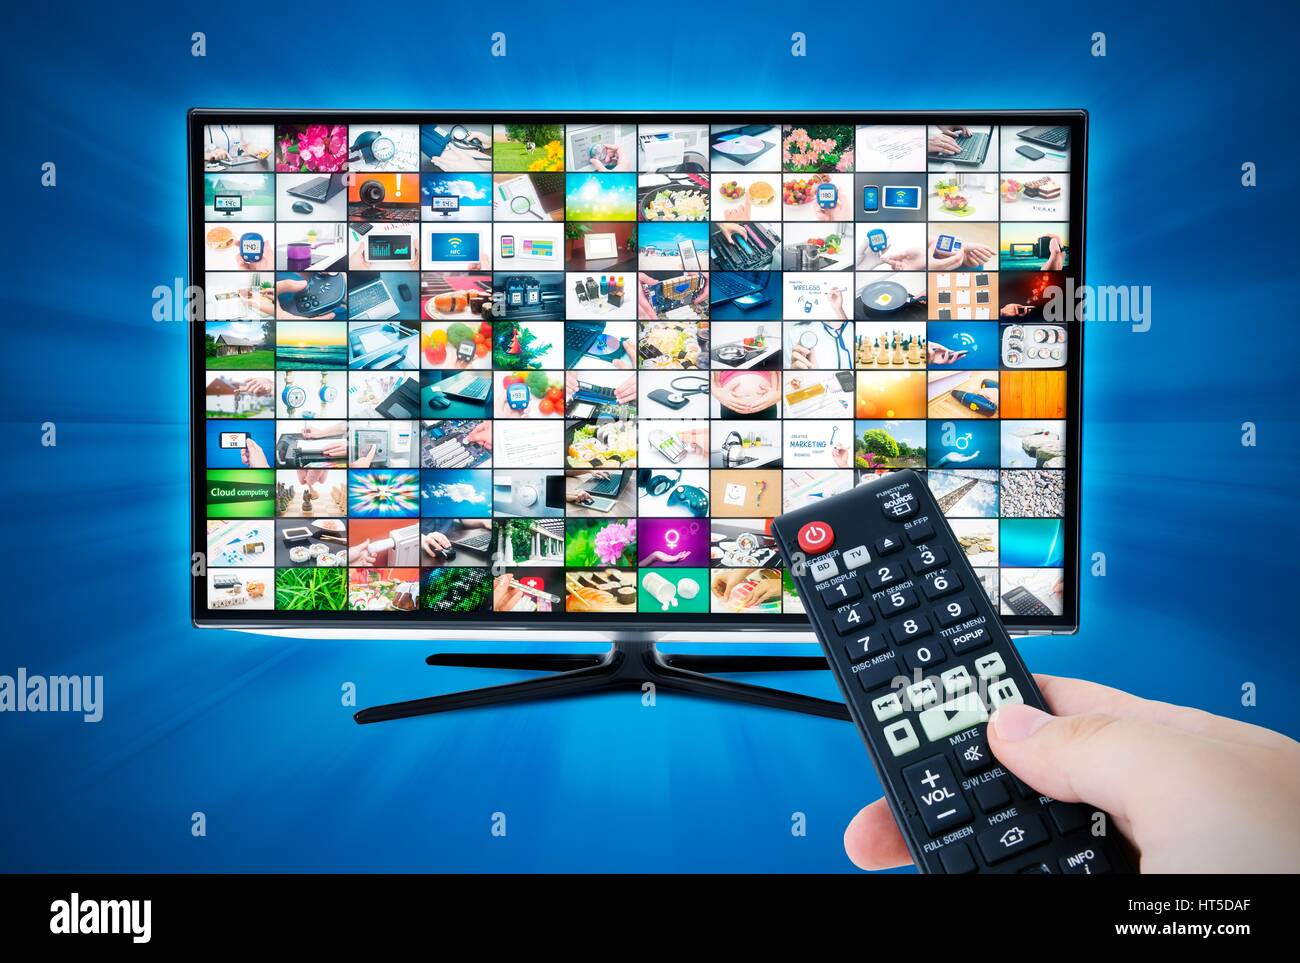 Widescreen high definition TV screen with video gallery. Remote control in hand Stock Photo